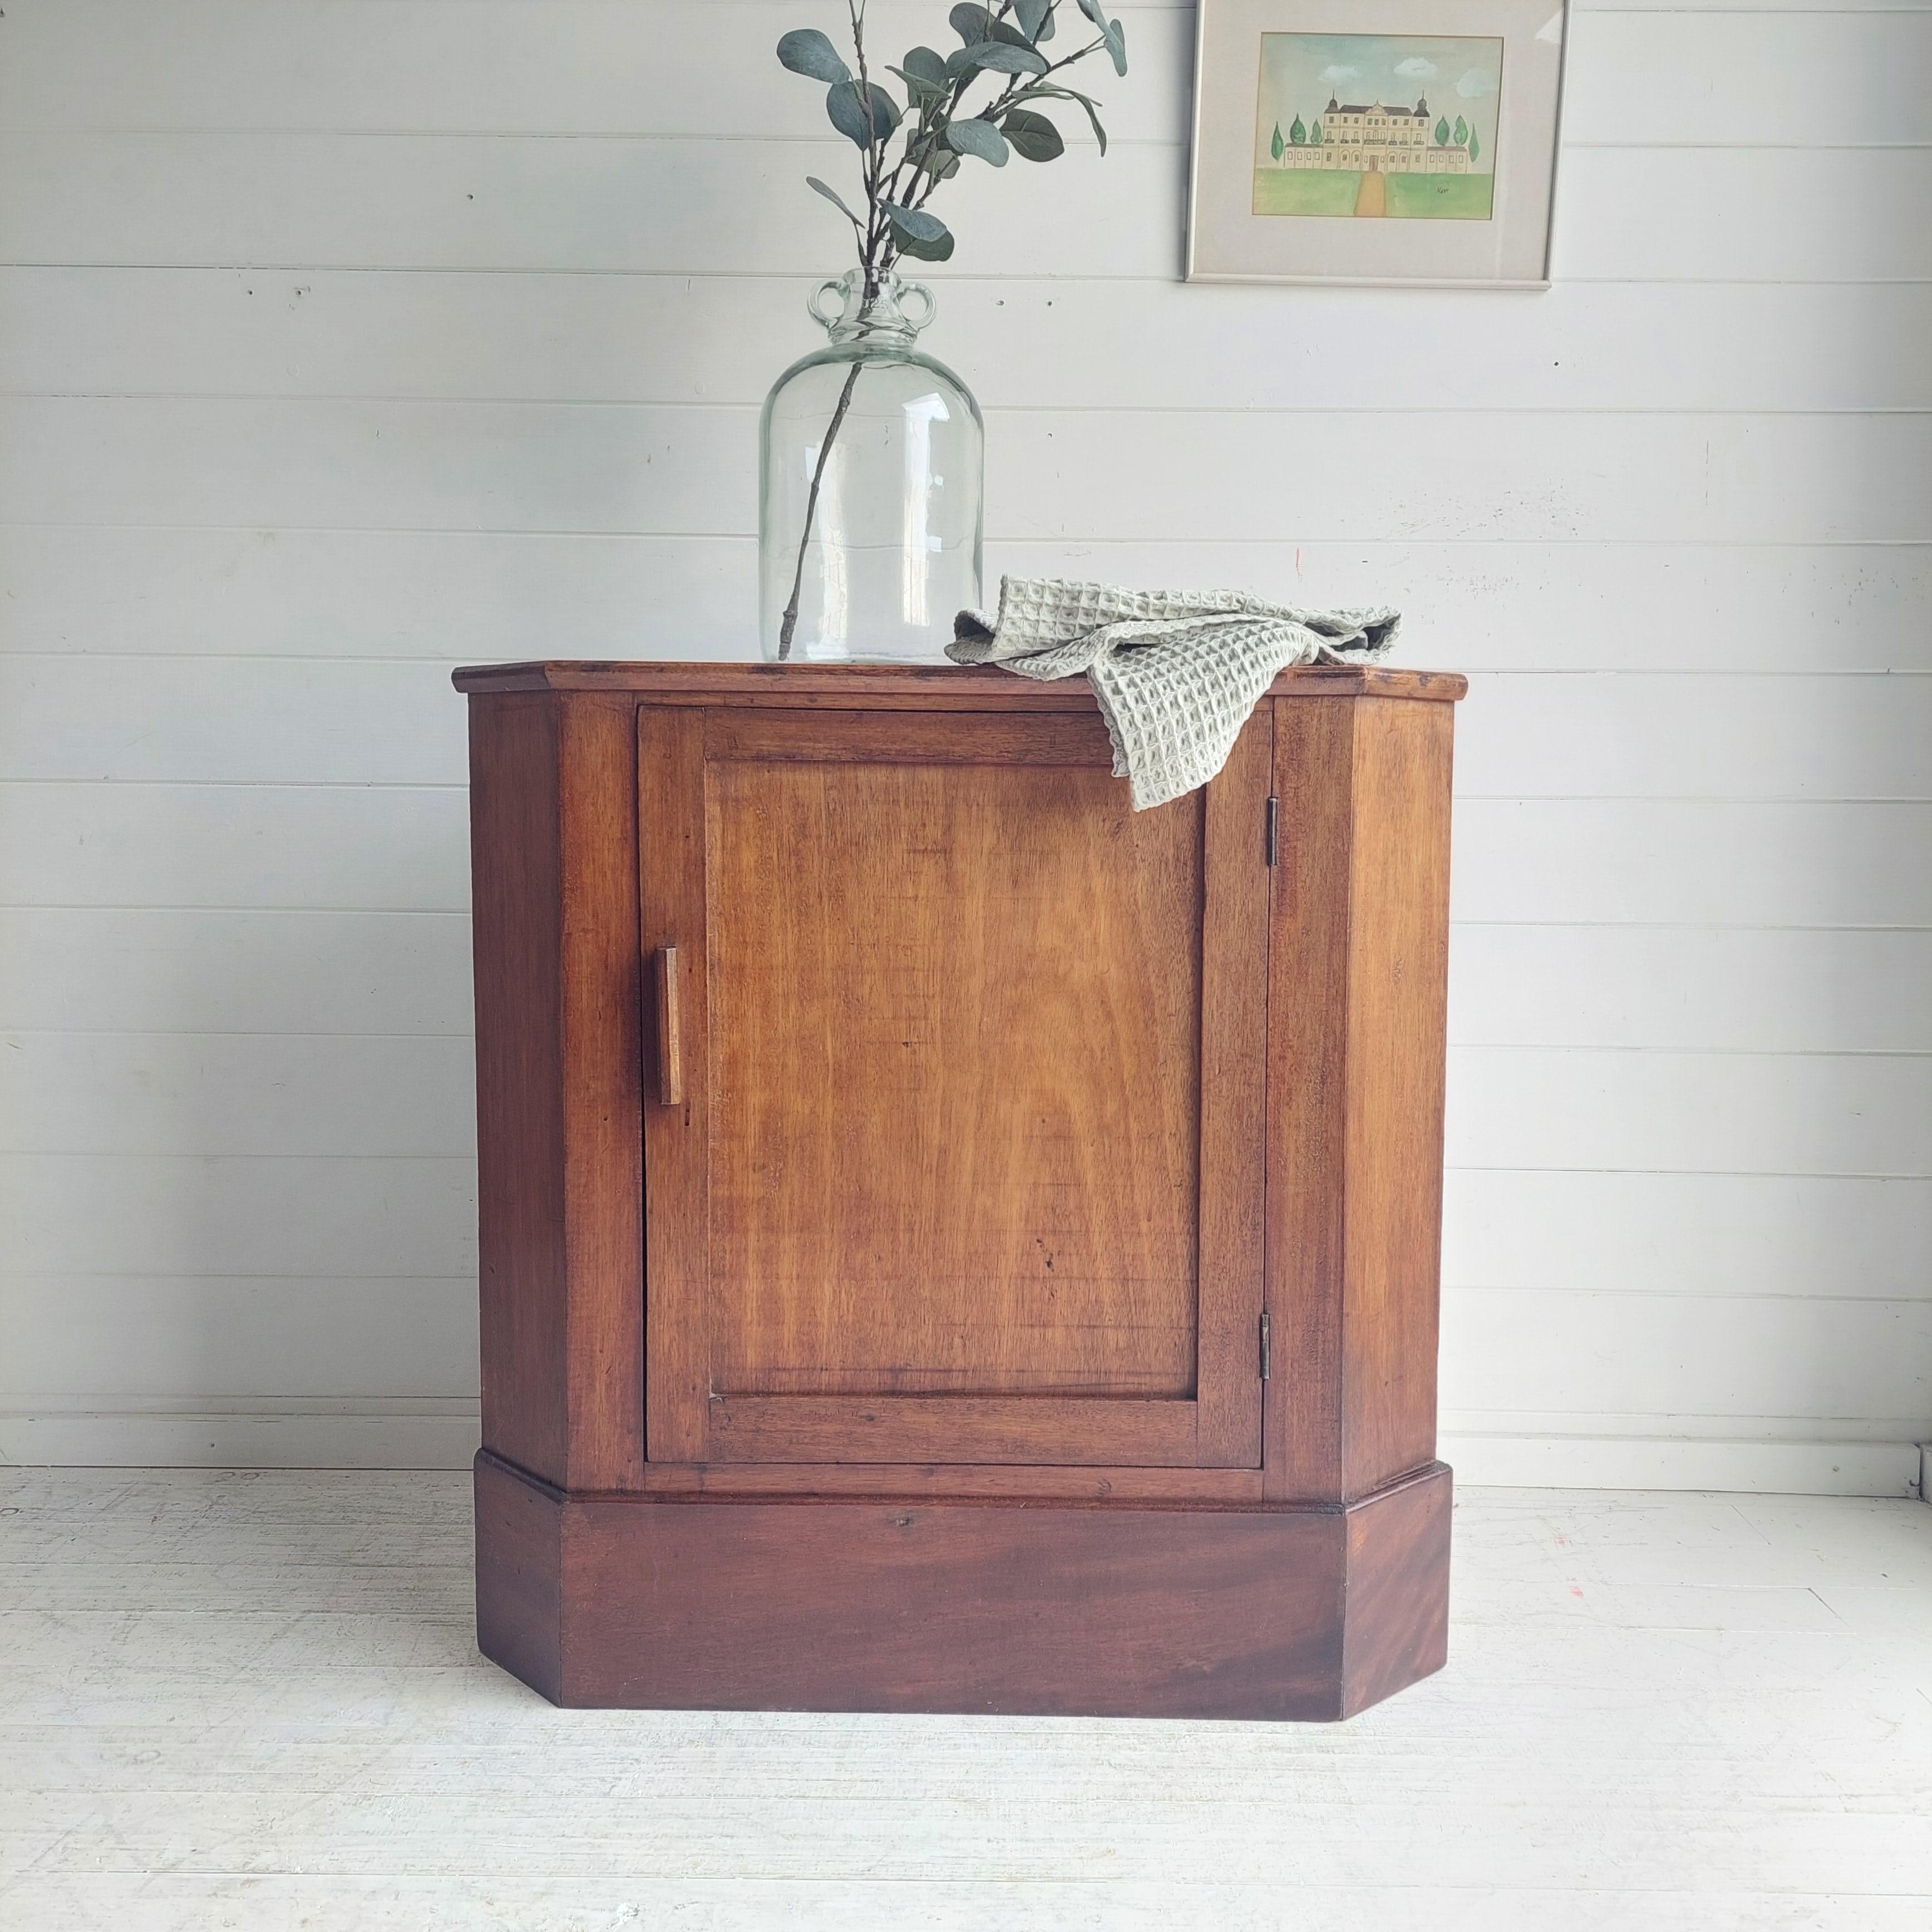 Late Victorian, Art Deco vintage mahogany corner unit.
Rustic country house feeling.

A desirable simply designed unit that will add character to any room.
Lovely piece with single paneled door and wooden geometrical carved handle.
Opens to reveal a